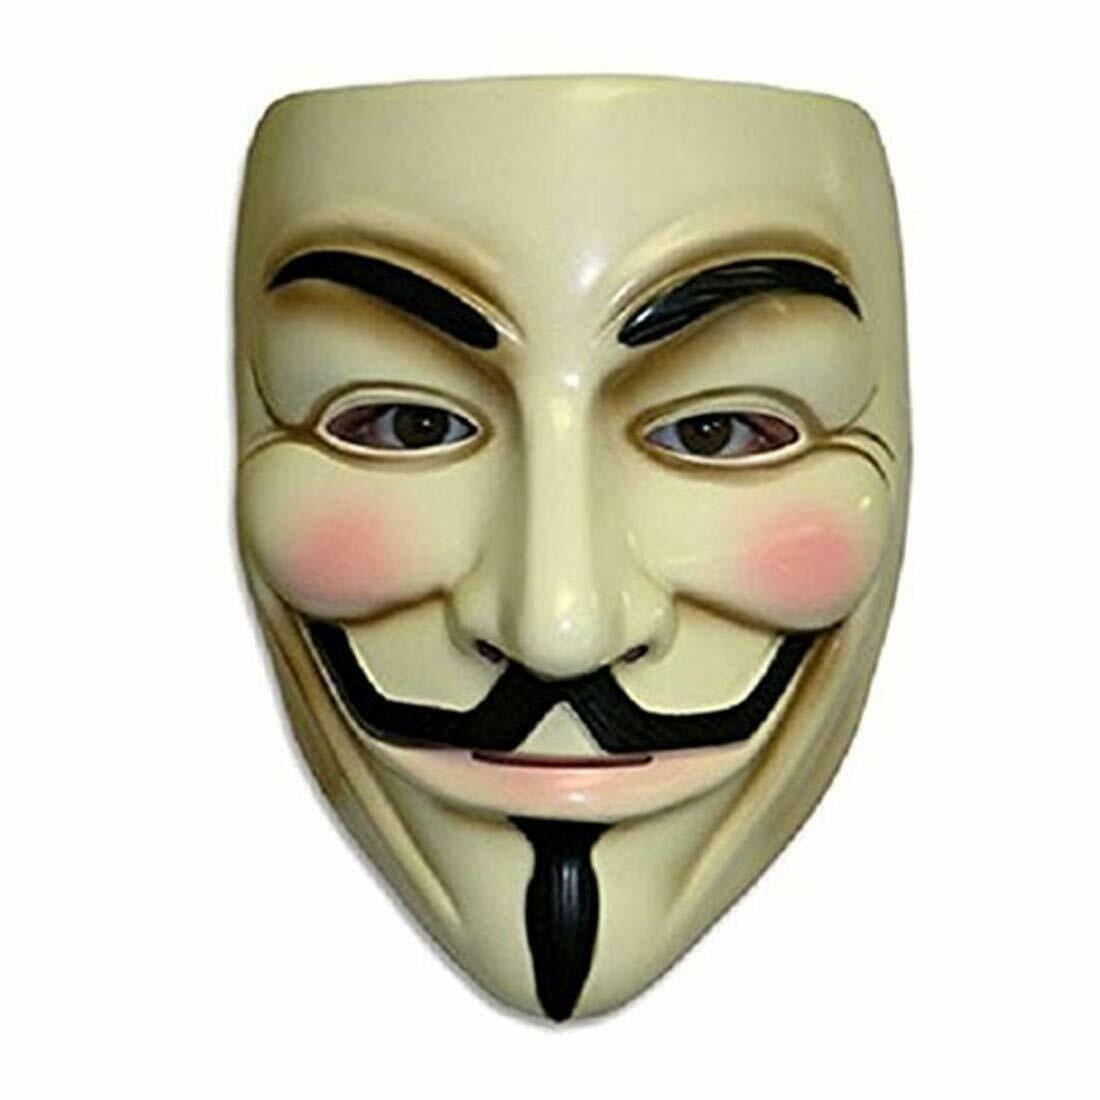 V pour Vendetta Masque Anonymous Guy Fawkes Fancy Dress Halloween Costume Cosplay 